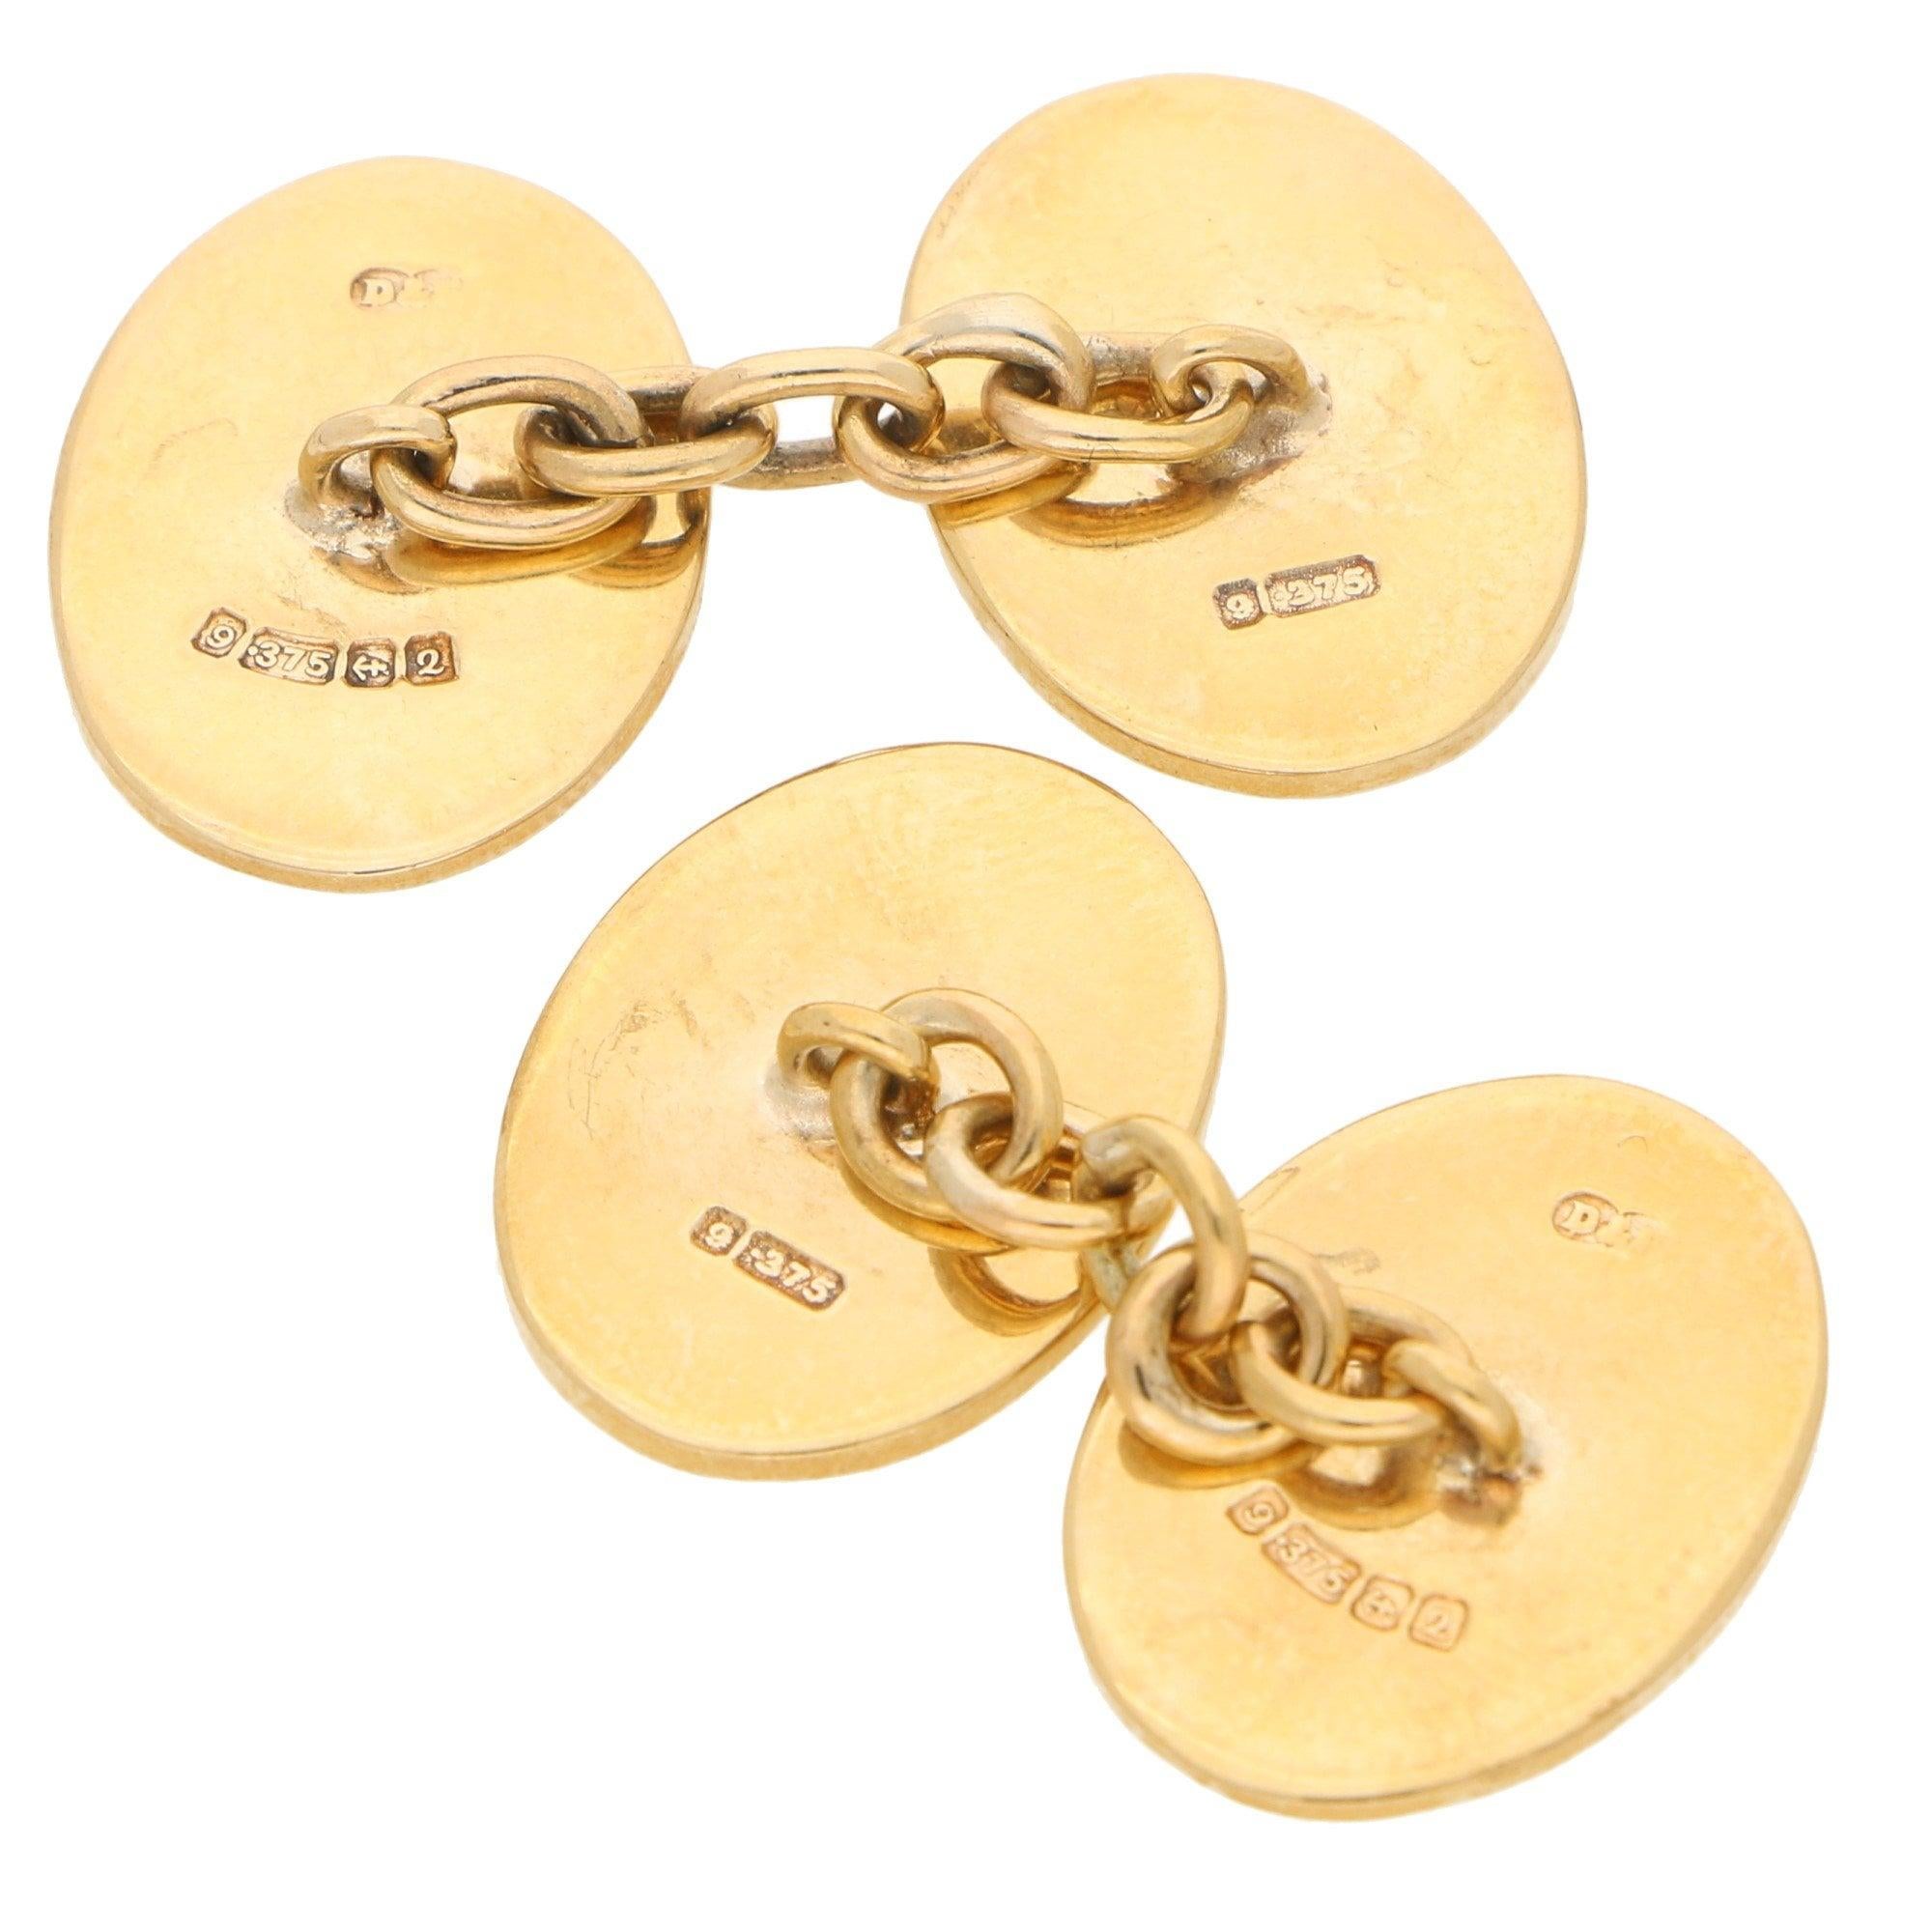 A beautiful pair of vintage oval geometric chain cufflinks set in 9k yellow gold. 

Each cufflink is composed of two terminals, one with a plain face, and the other with a vintage geometric design. The pair are connected by a secure chain link